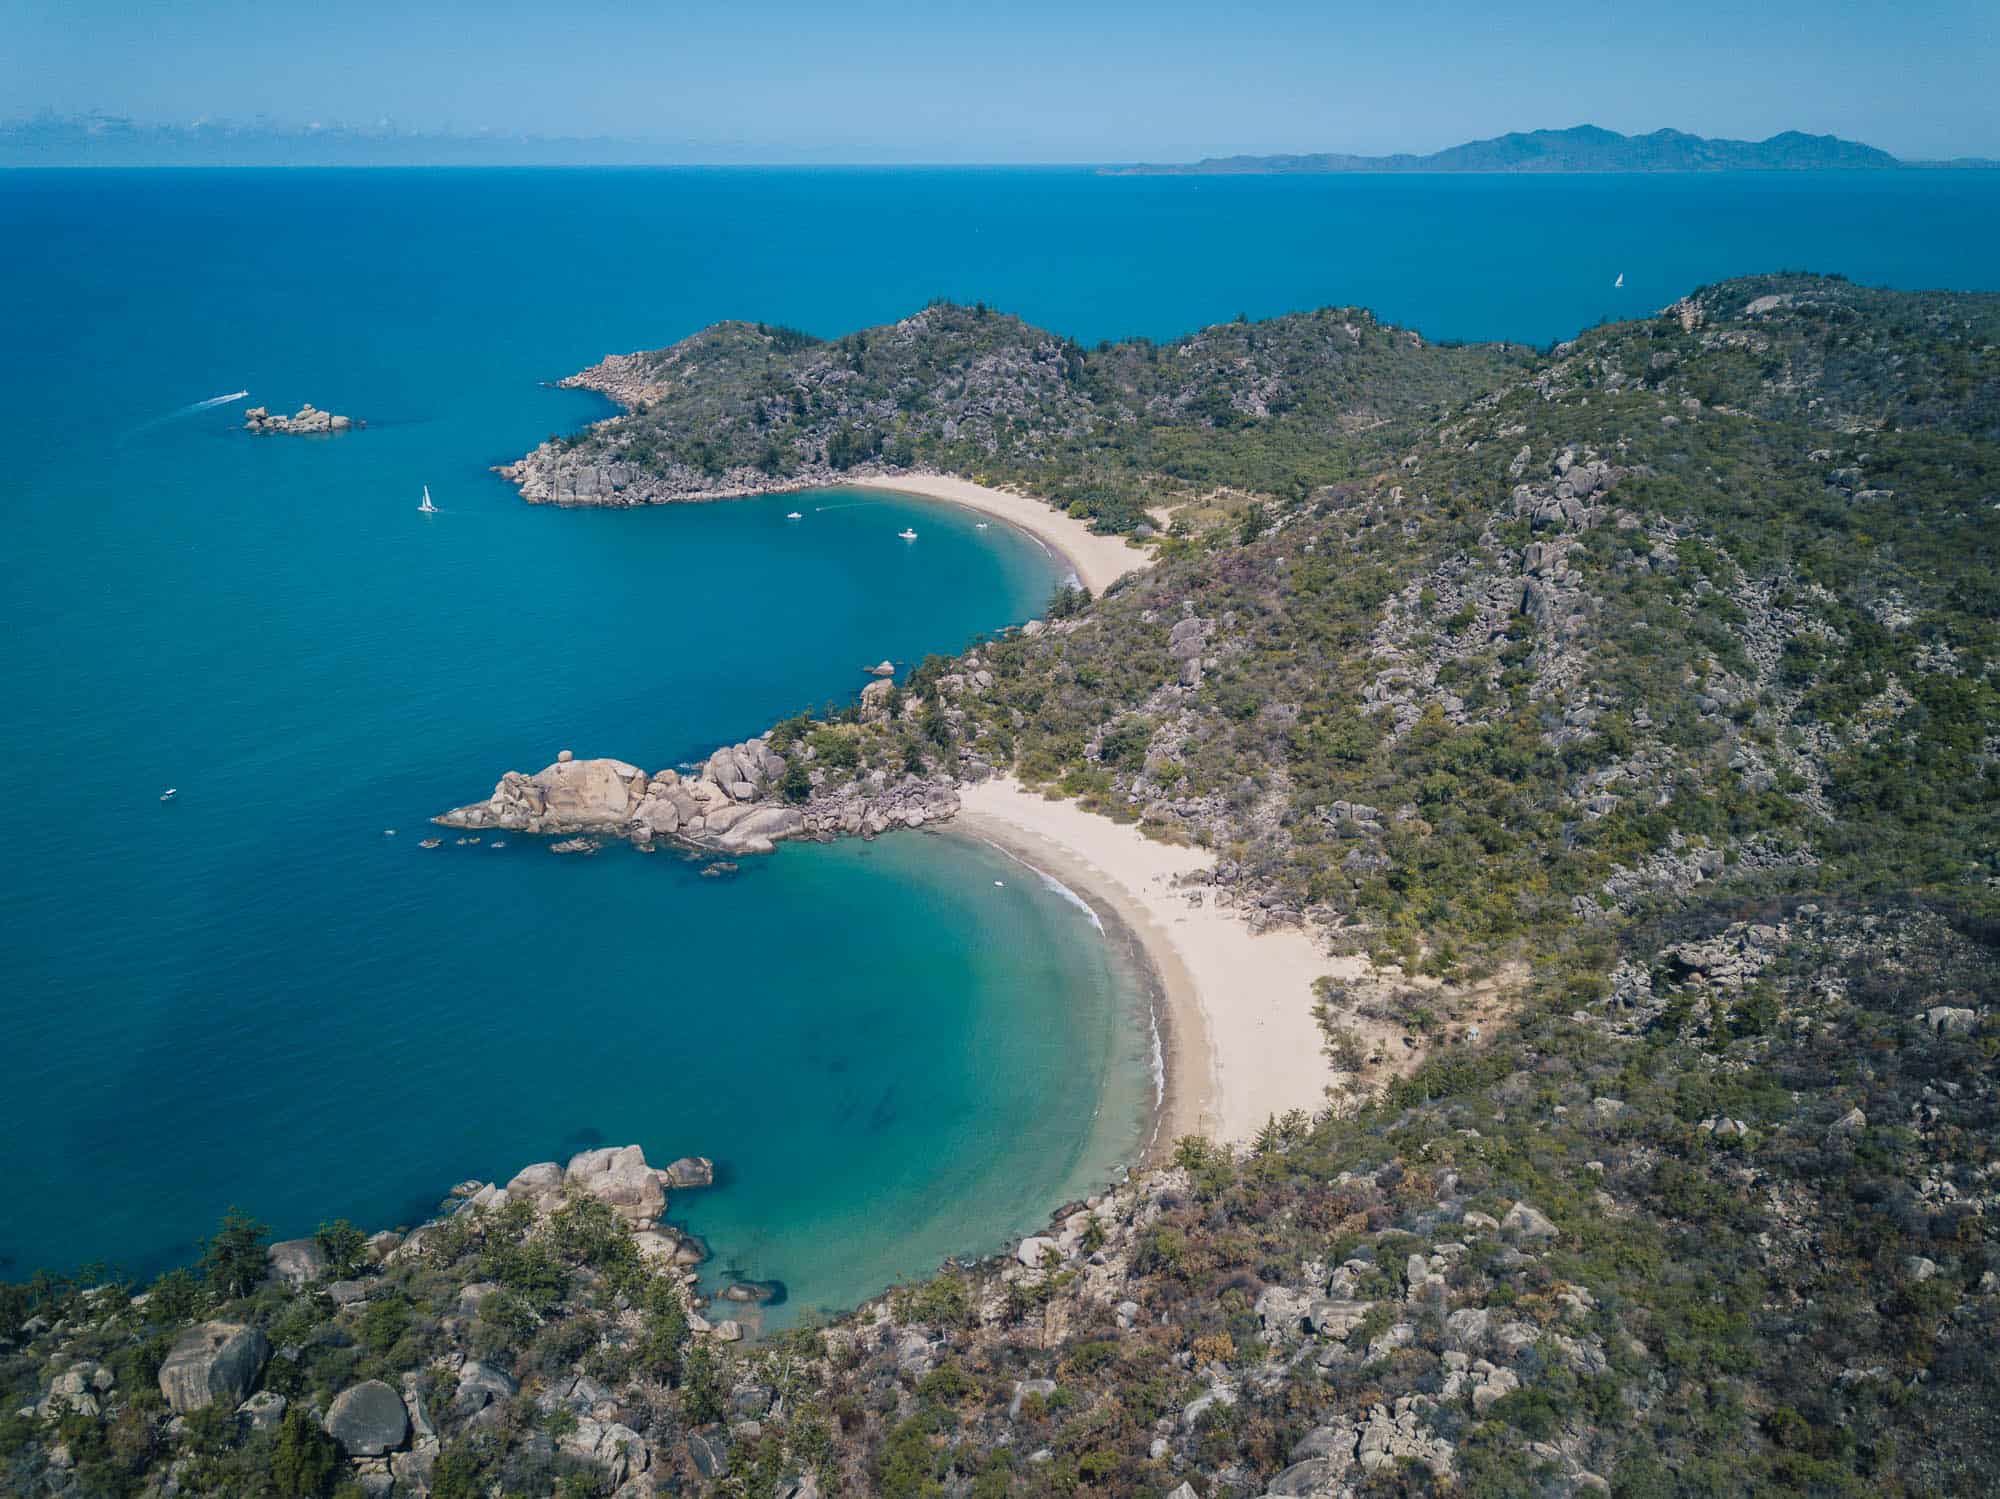 magnetic island tour, magnetic island, things to do on magnetic island, things to do in magnetic island, magnetic island australia, magnetic island queensland